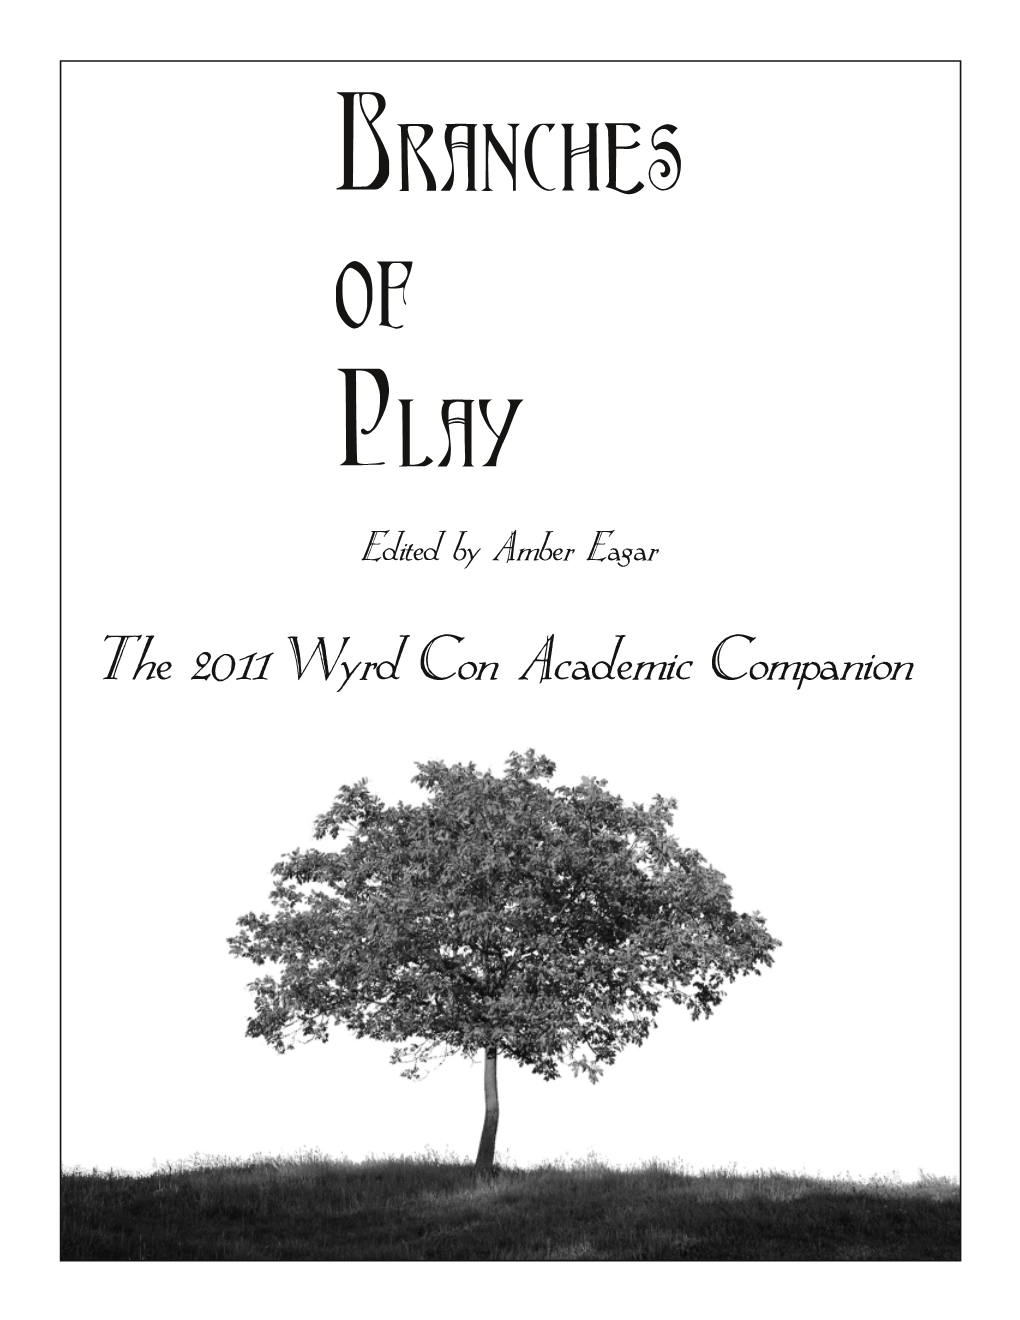 Branches of Play